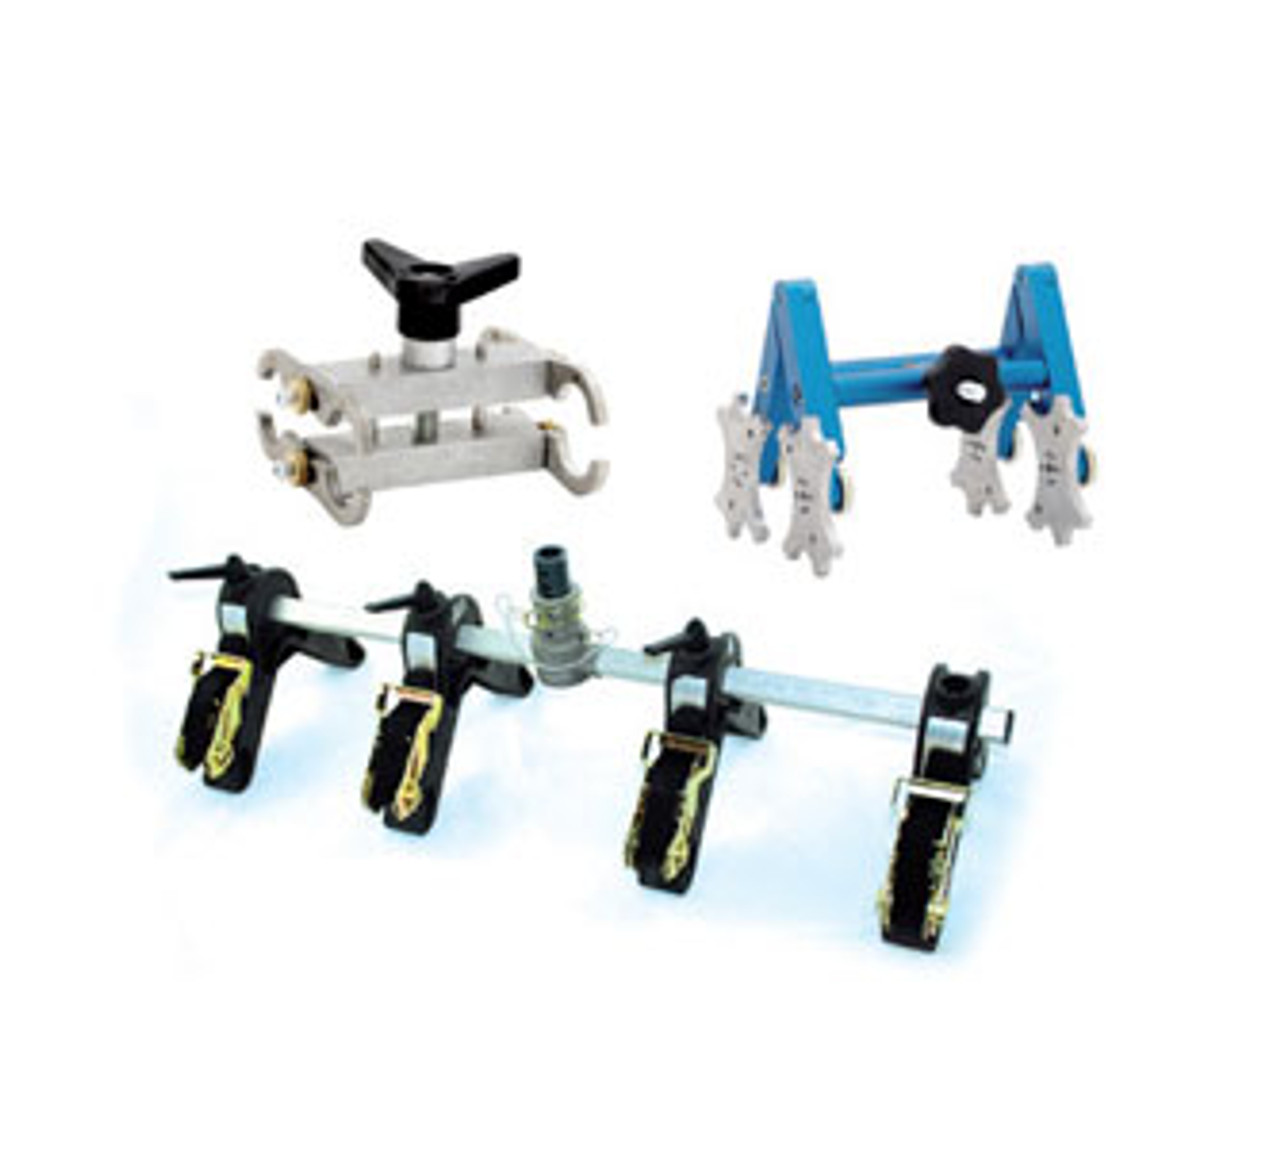 Welding Clamps 20-63mm Universal 2 Way With Angle Maker Base